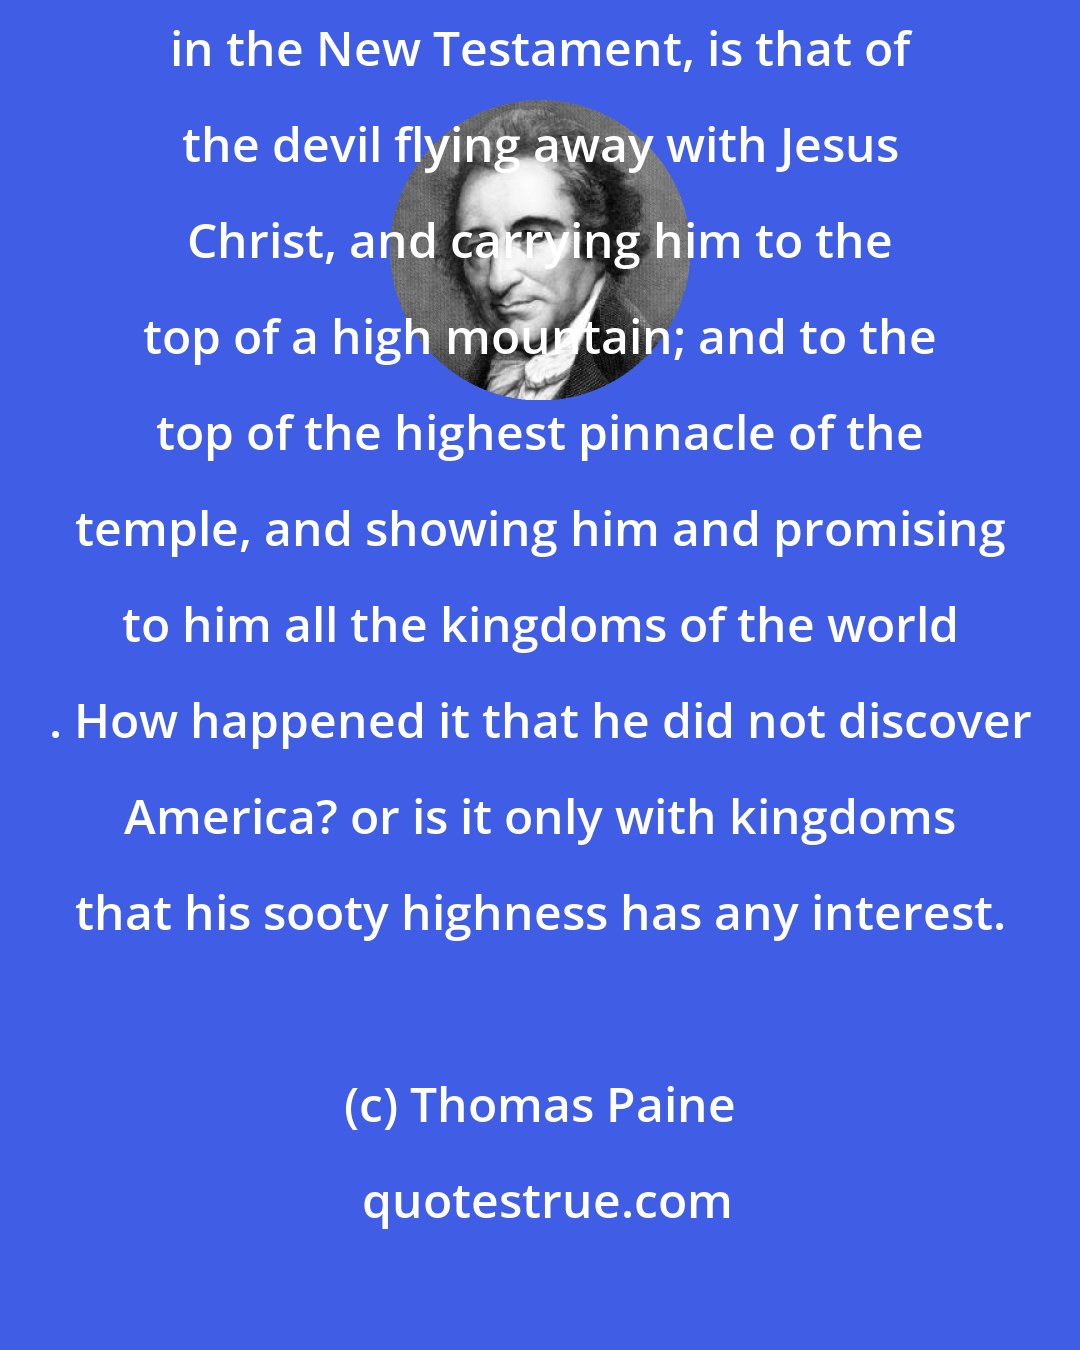 Thomas Paine: The most extraordinary of all the things called miracles, related in the New Testament, is that of the devil flying away with Jesus Christ, and carrying him to the top of a high mountain; and to the top of the highest pinnacle of the temple, and showing him and promising to him all the kingdoms of the world . How happened it that he did not discover America? or is it only with kingdoms that his sooty highness has any interest.